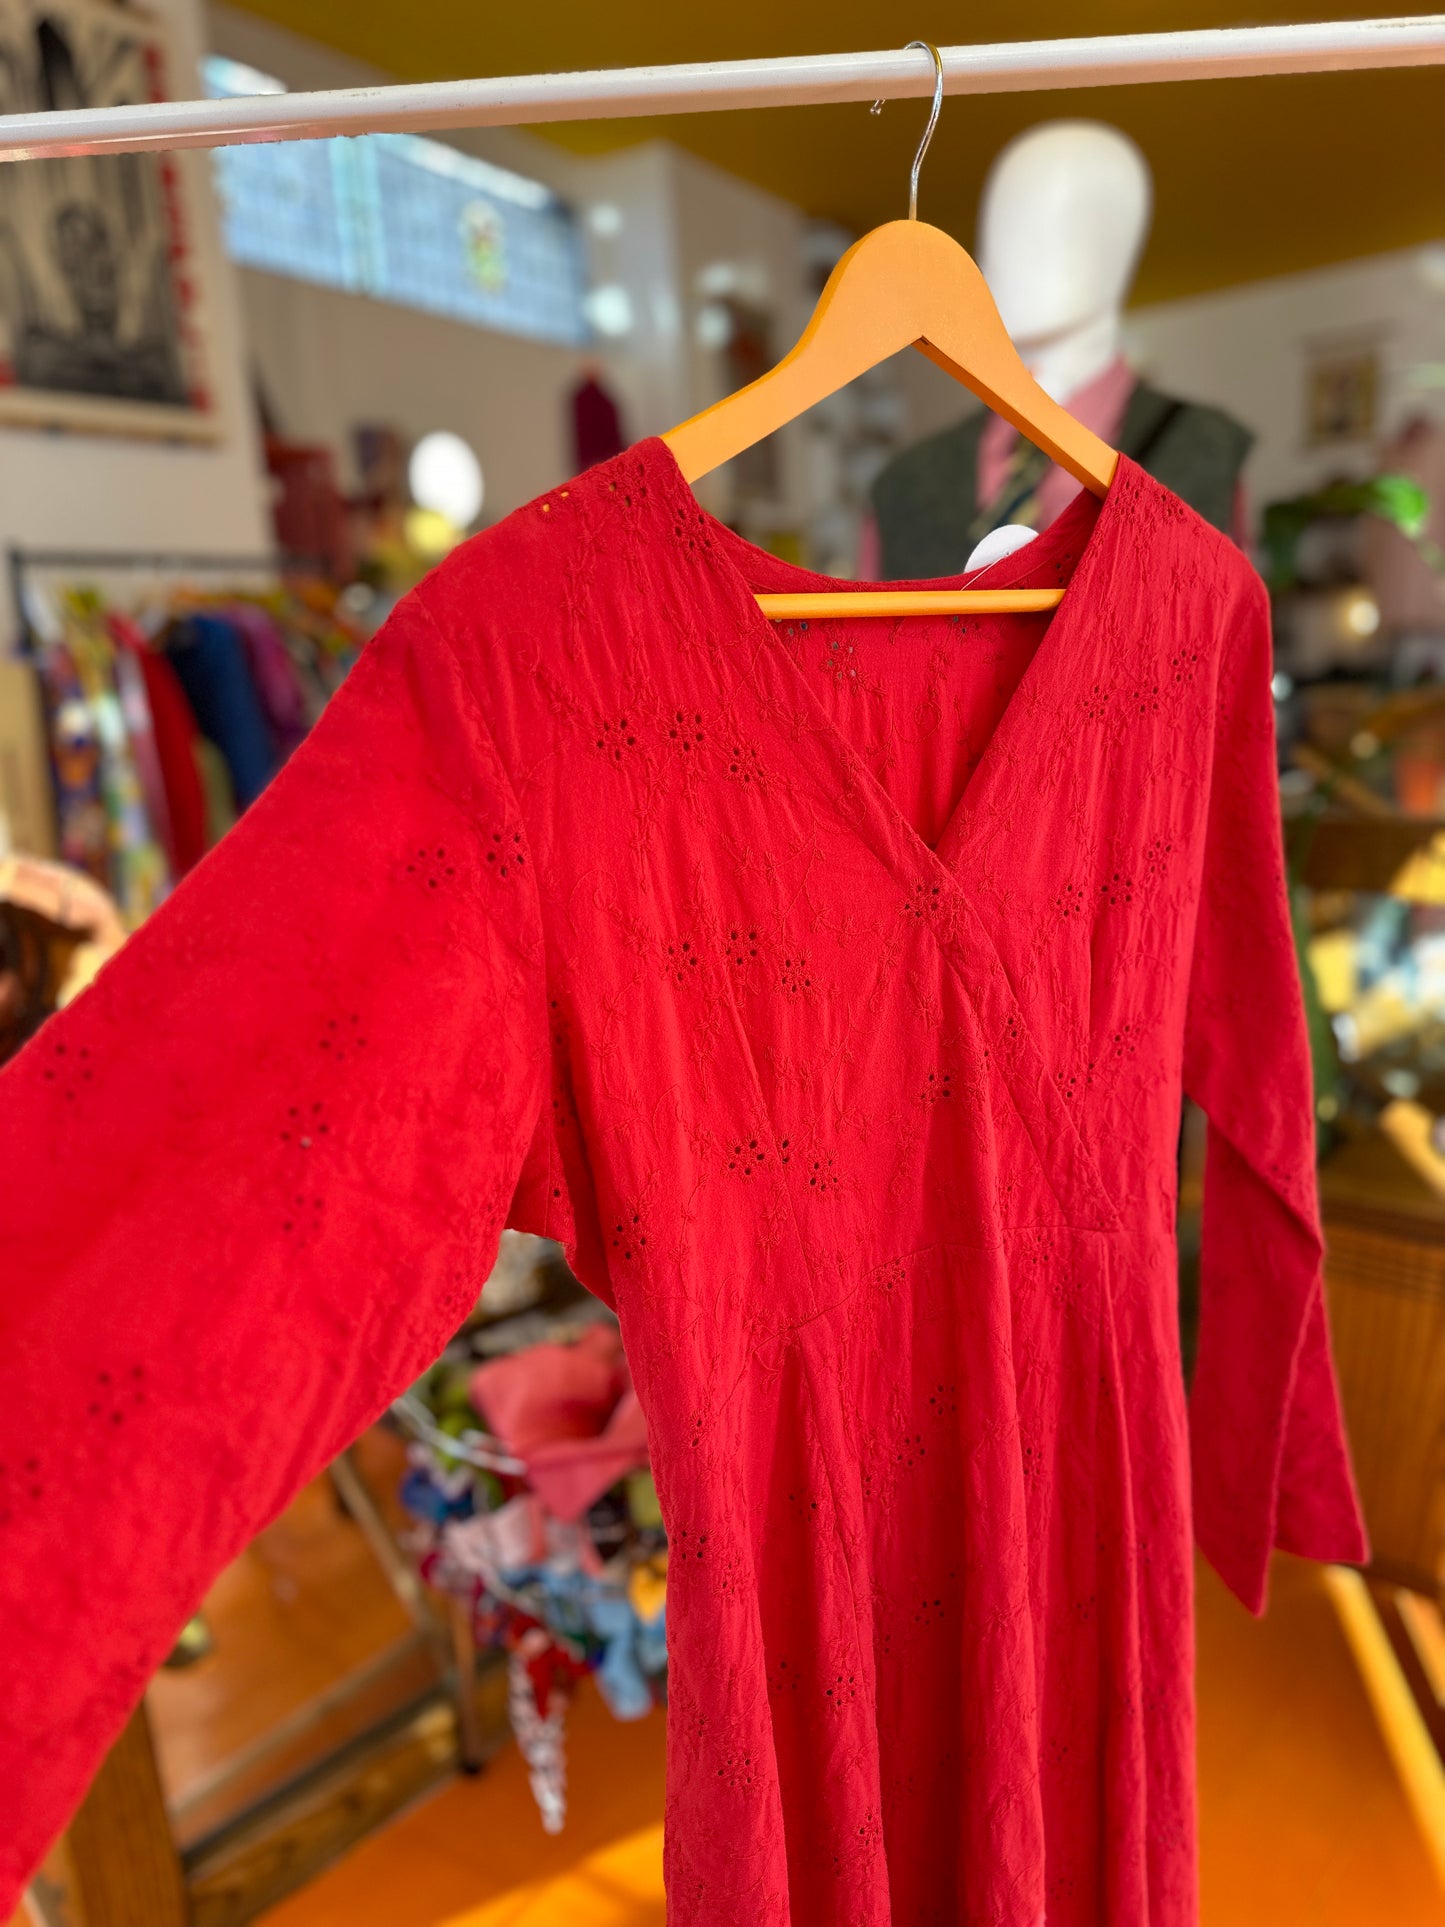 Vintage Handmade Red Dress with Broderie Anglaise